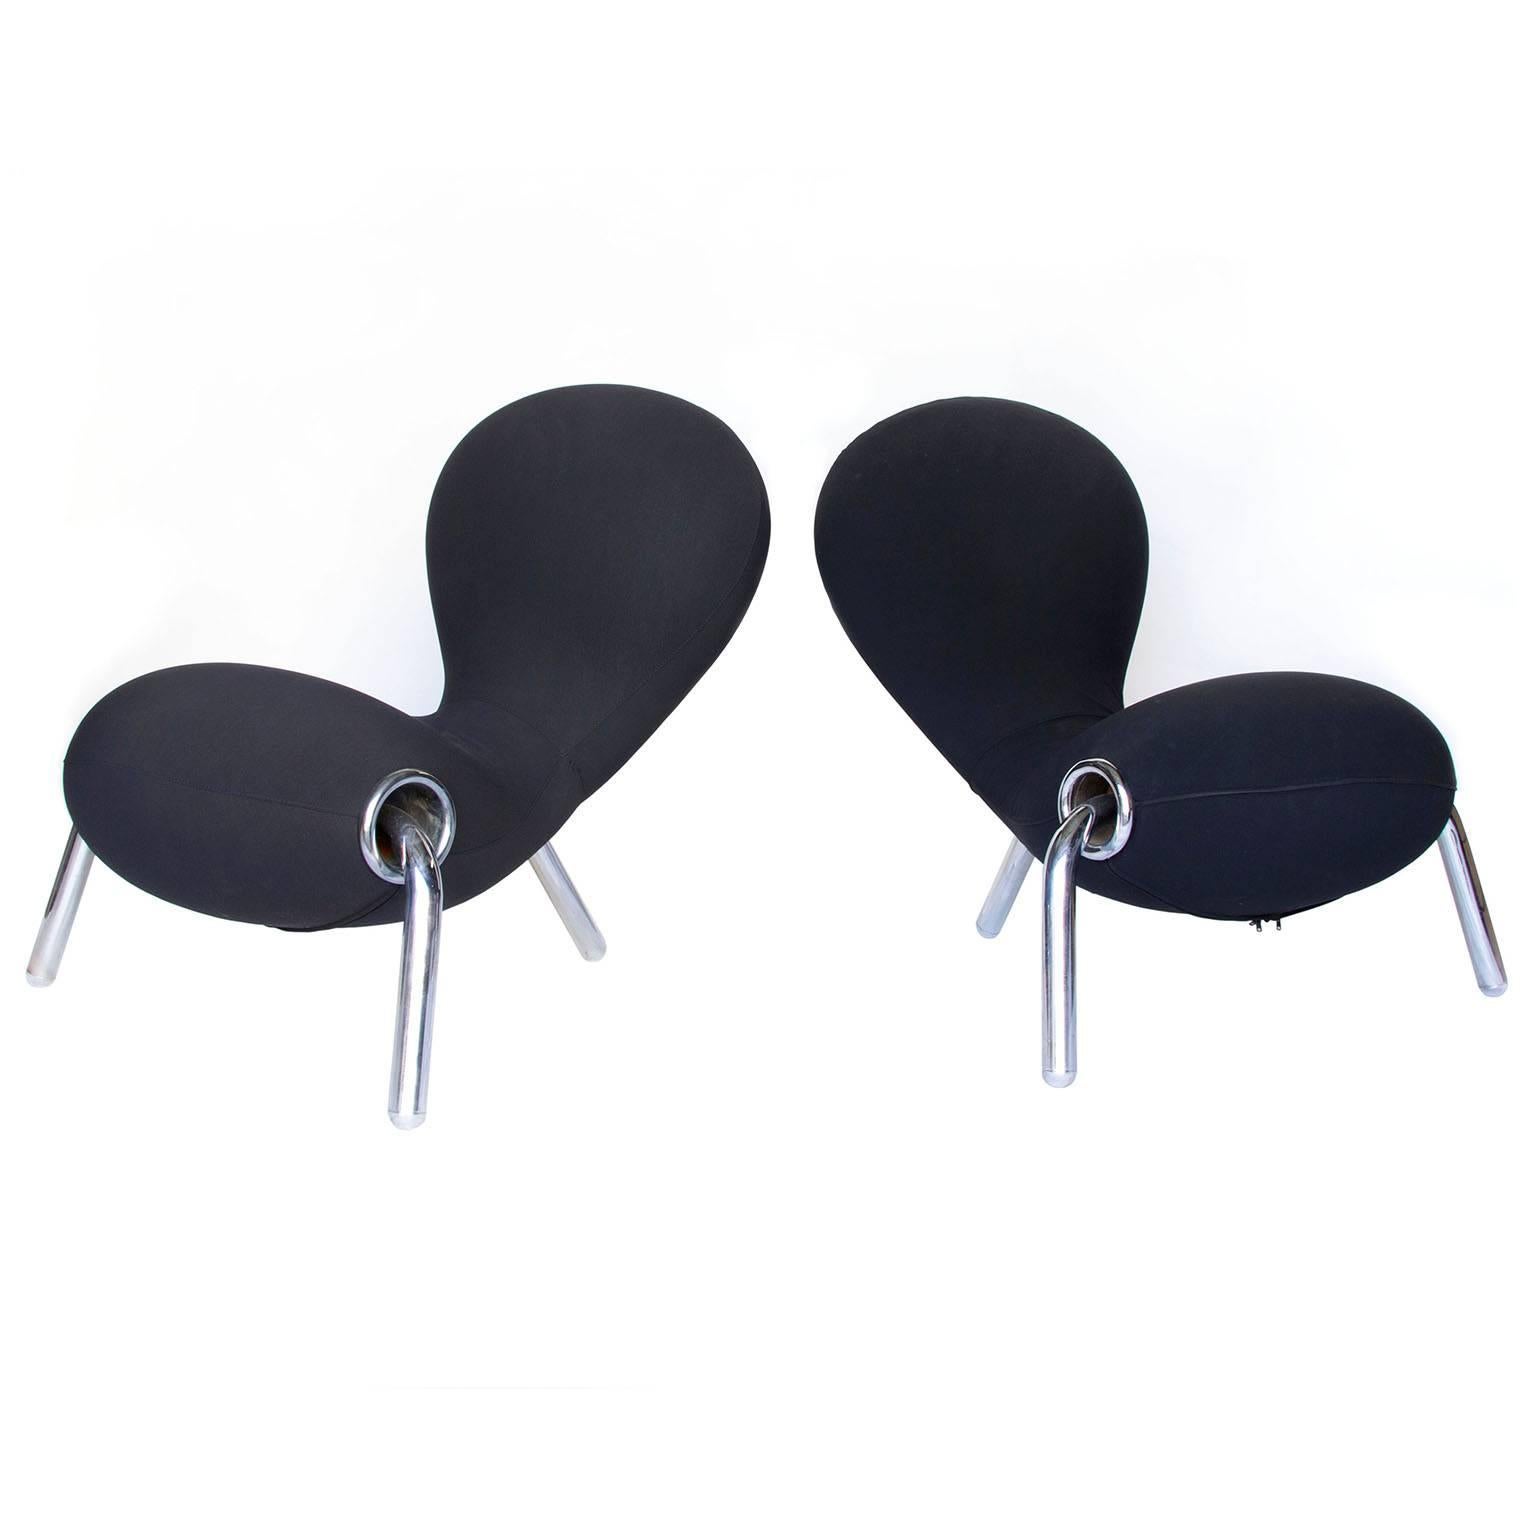 Two black Embryo Chairs in black. The embryo chair was designed by Marc Newson in 1988. This chair was commissioned by the Museum of Applied Arts and Sciences (Powerhouse Museum.) Marc Newson was only 25 when he designed the embryo chair for the